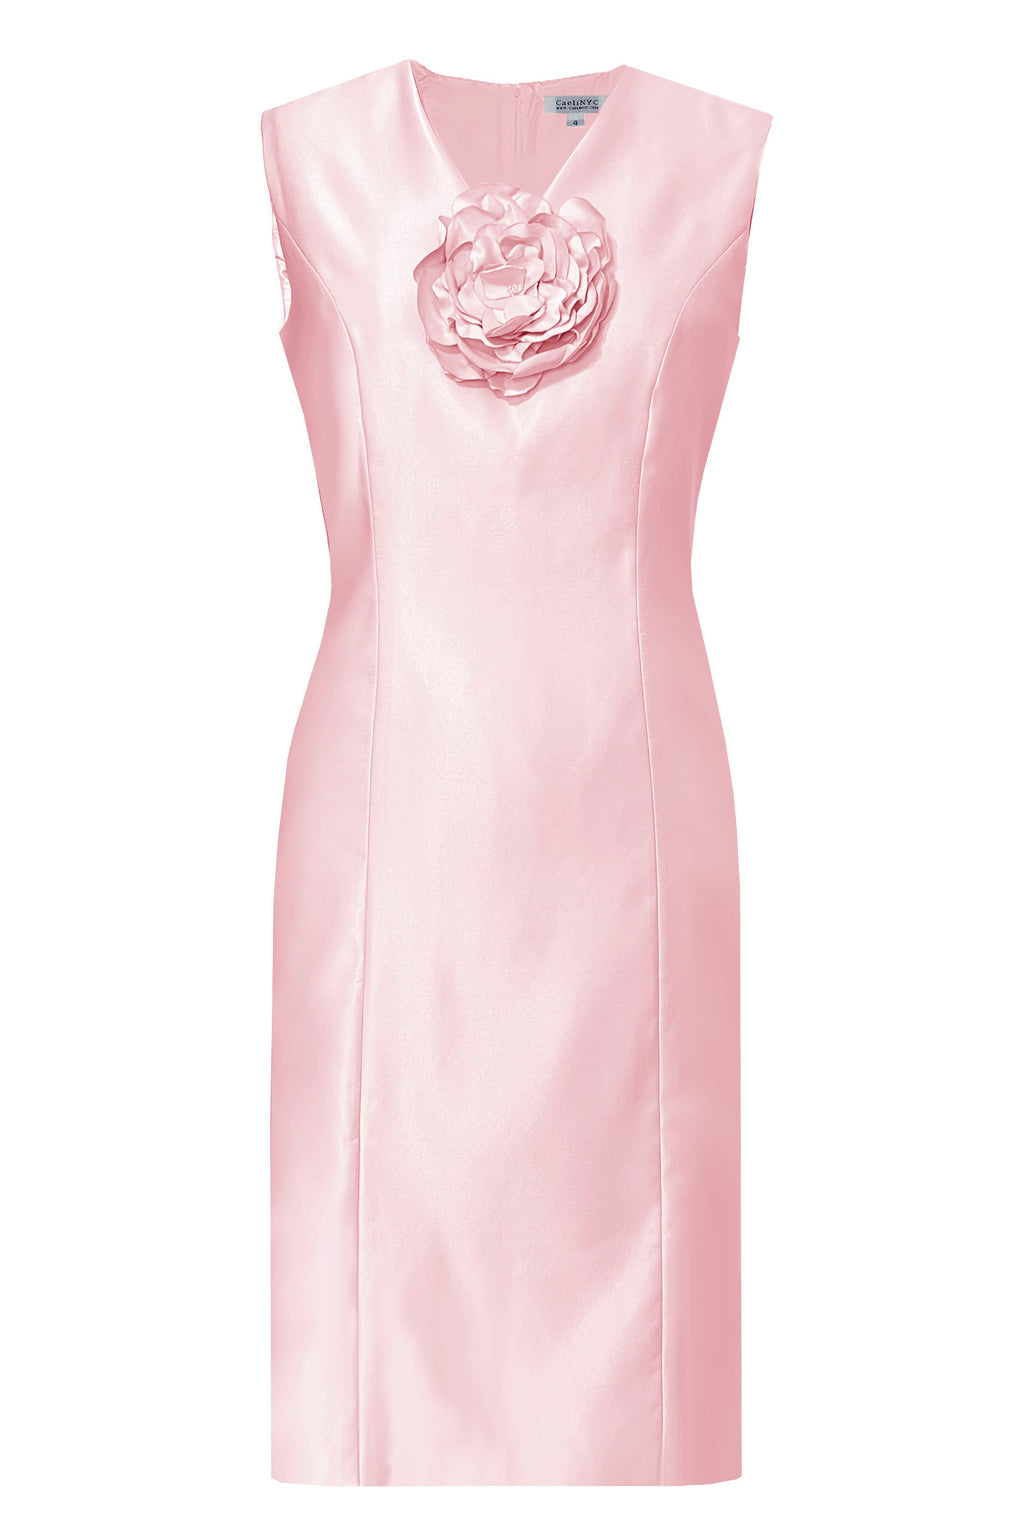 Pink Cocktail Dress with Flower Detail